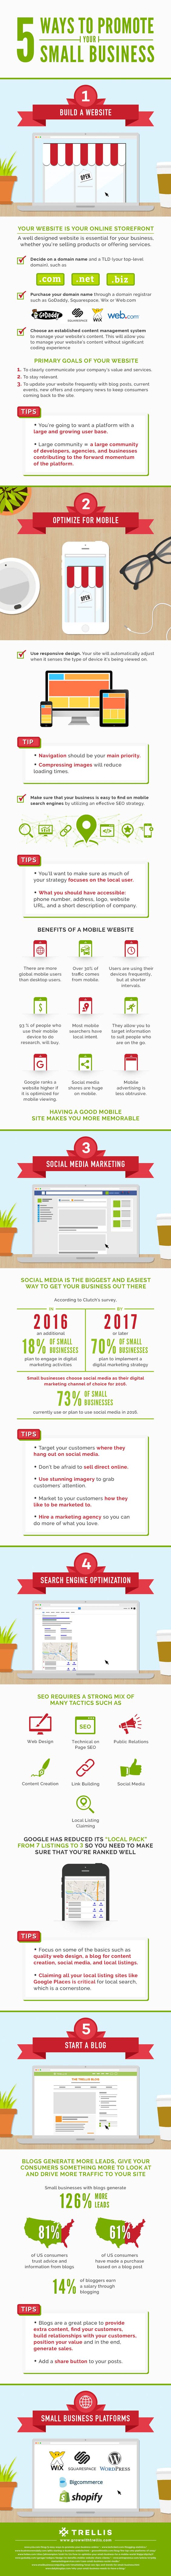 5 Ways to Promote Your Small Business Online [Infographic]